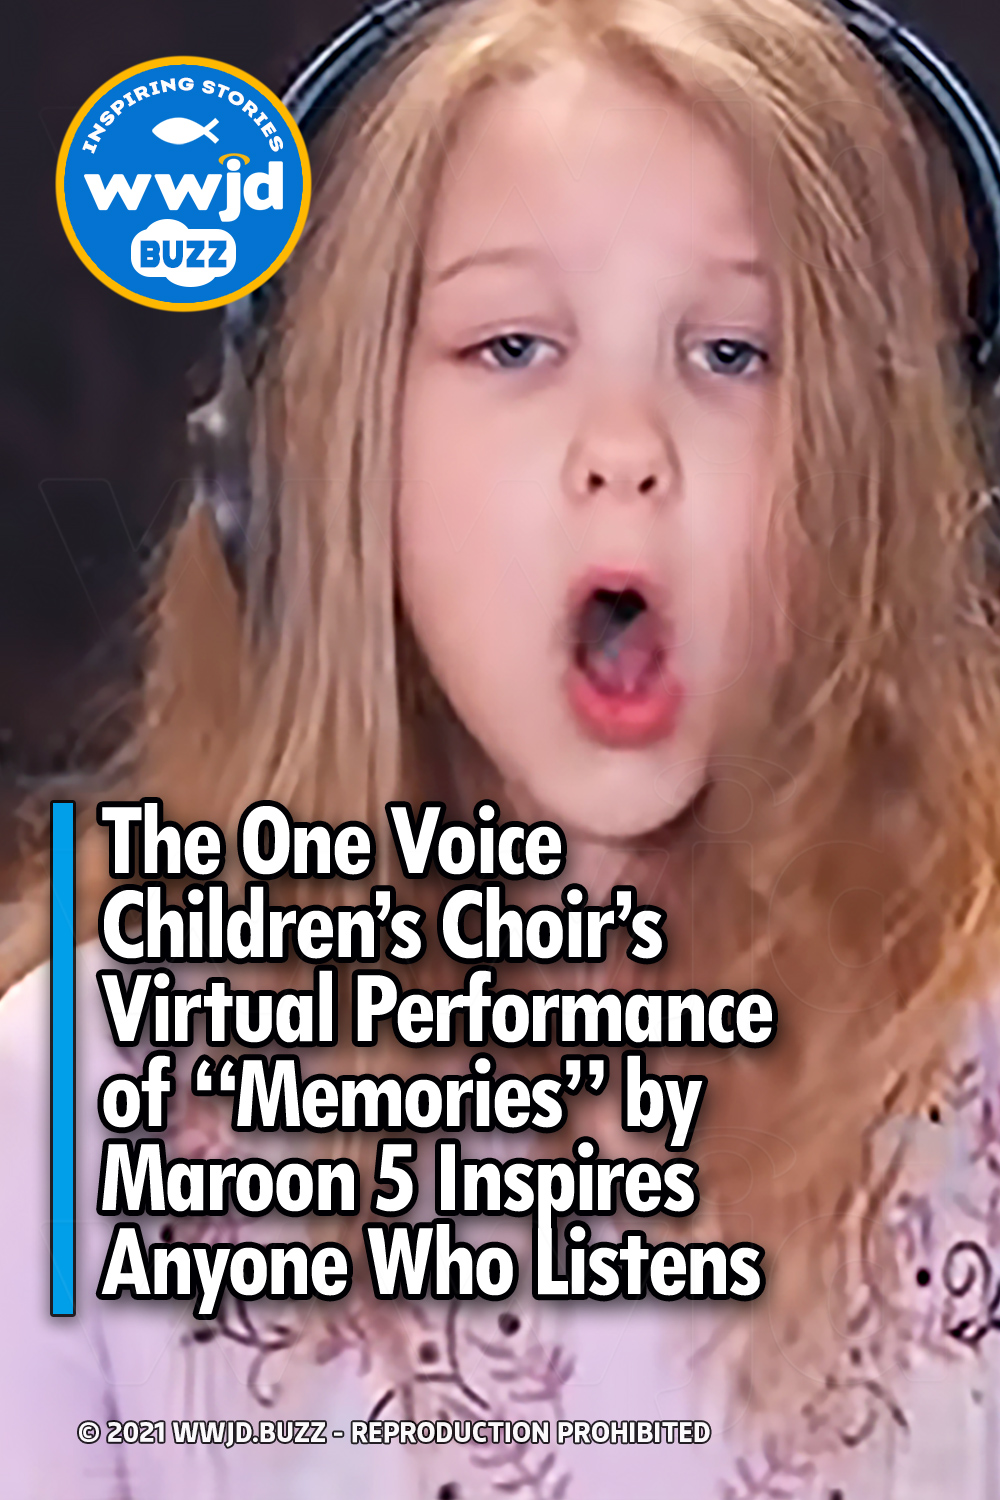 The One Voice Children’s Choir’s Virtual Performance of “Memories” by Maroon 5 Inspires Anyone Who Listens